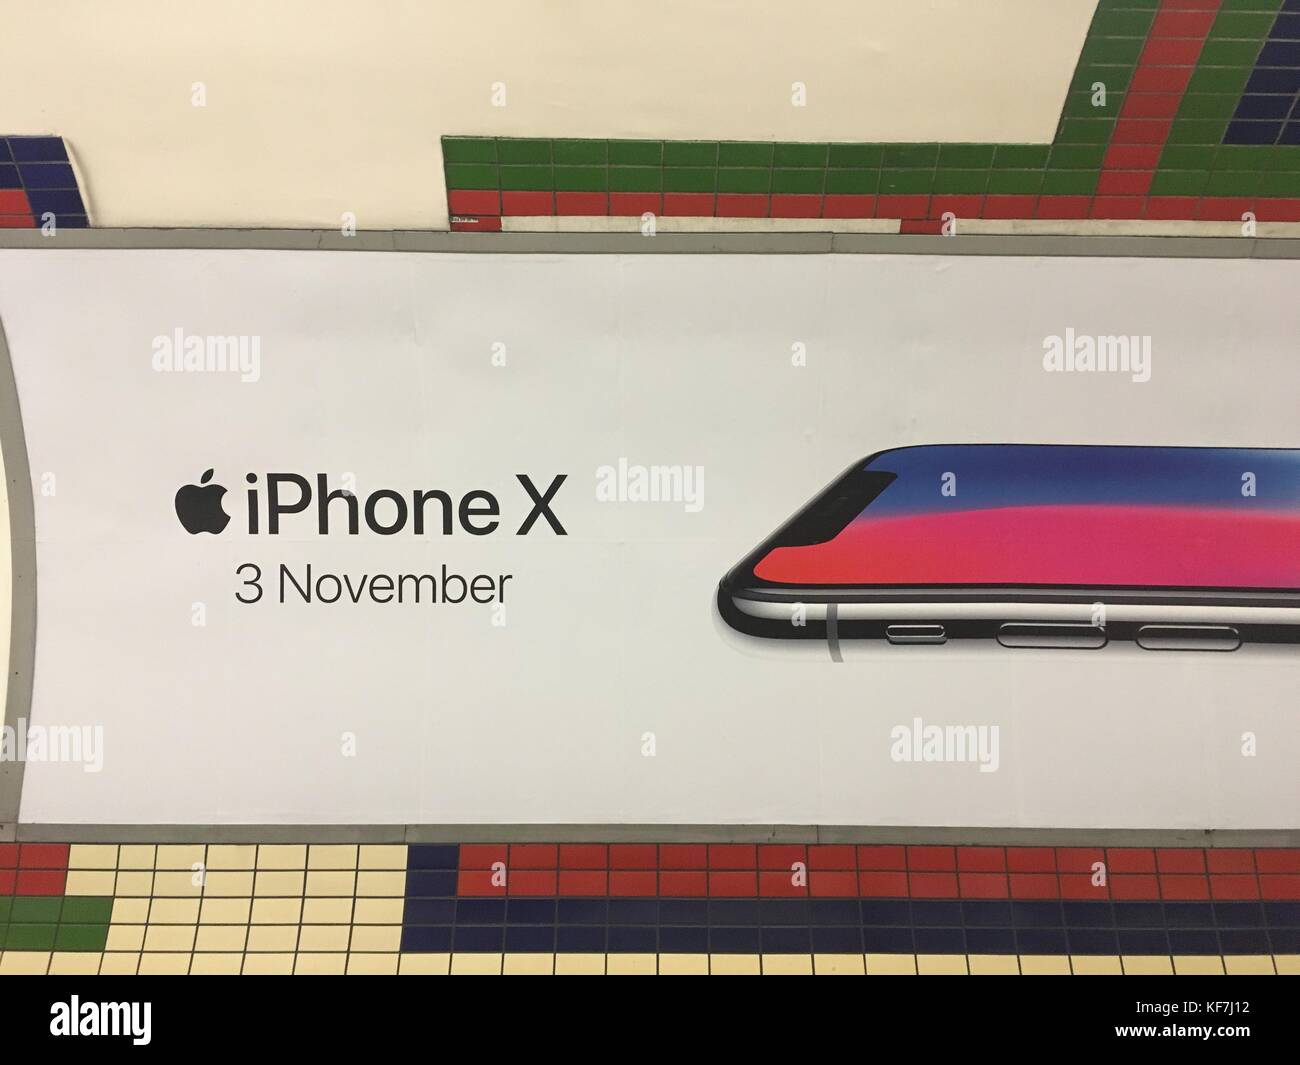 LONDON, UK - OCTOBER 25th 2017: A billboard advertisment for the new iPhone X smartphone by Apple Stock Photo